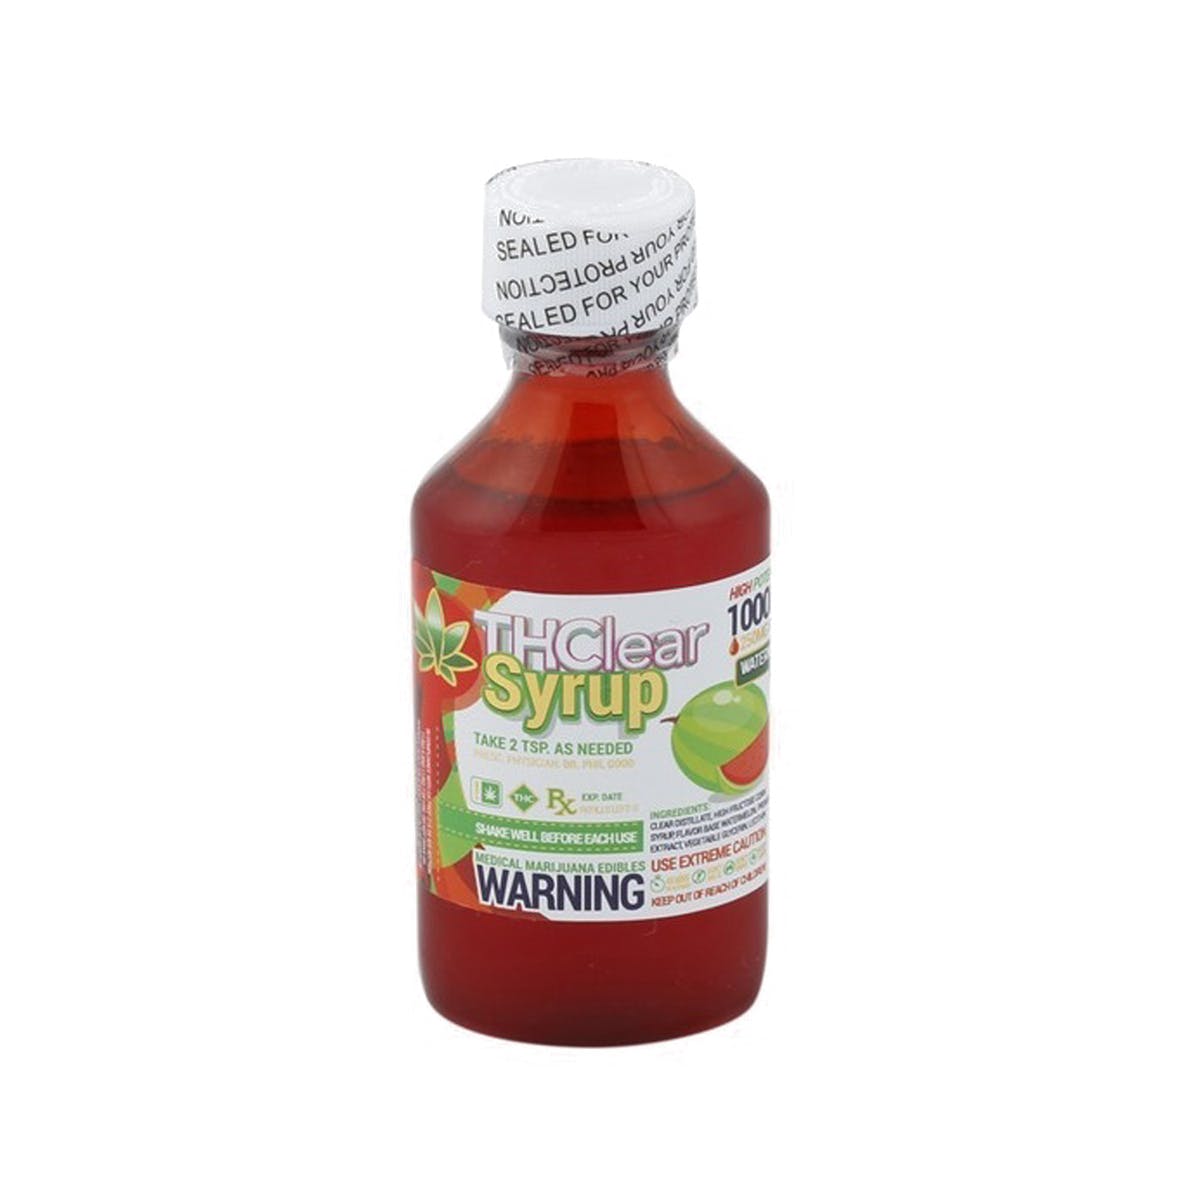 marijuana-dispensaries-mr-steal-your-patients-2419-cap-in-whittier-watermelon-syrup-1000mg